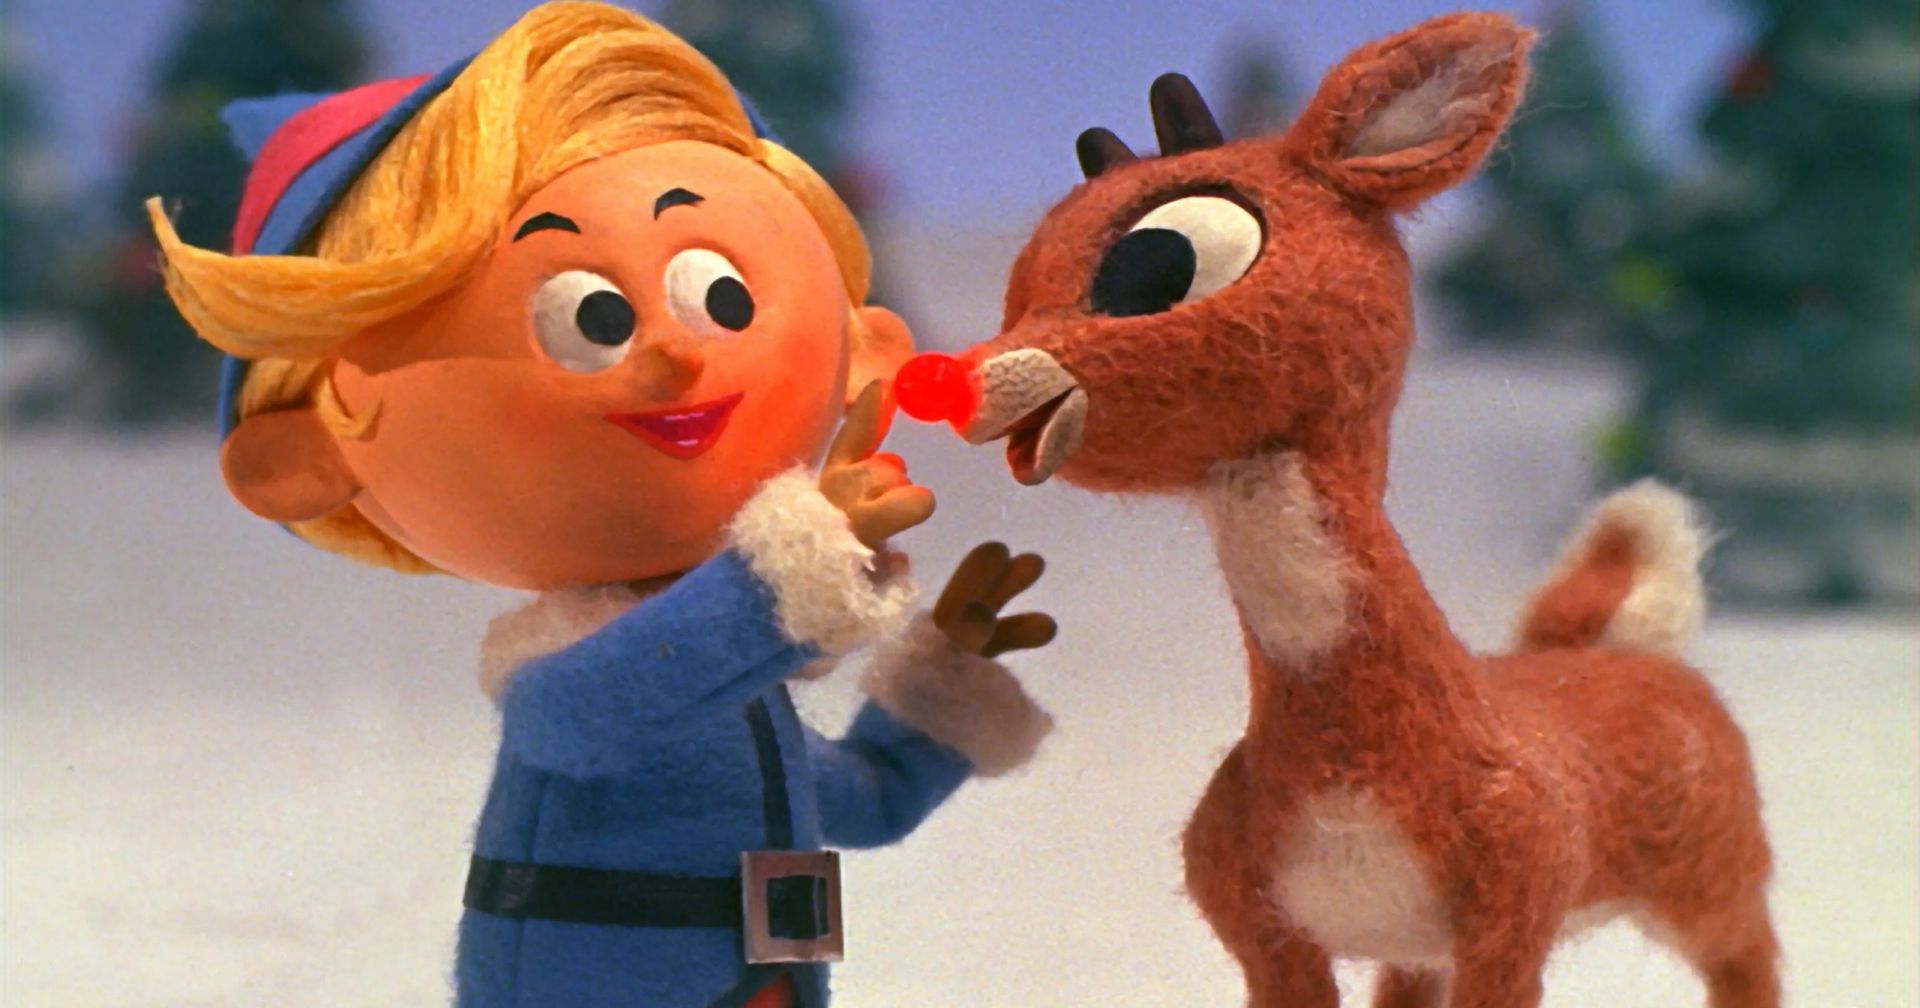 People Are Criticizing The Classic Rudolph The Red-Nosed Reindeer For Being Un-PC